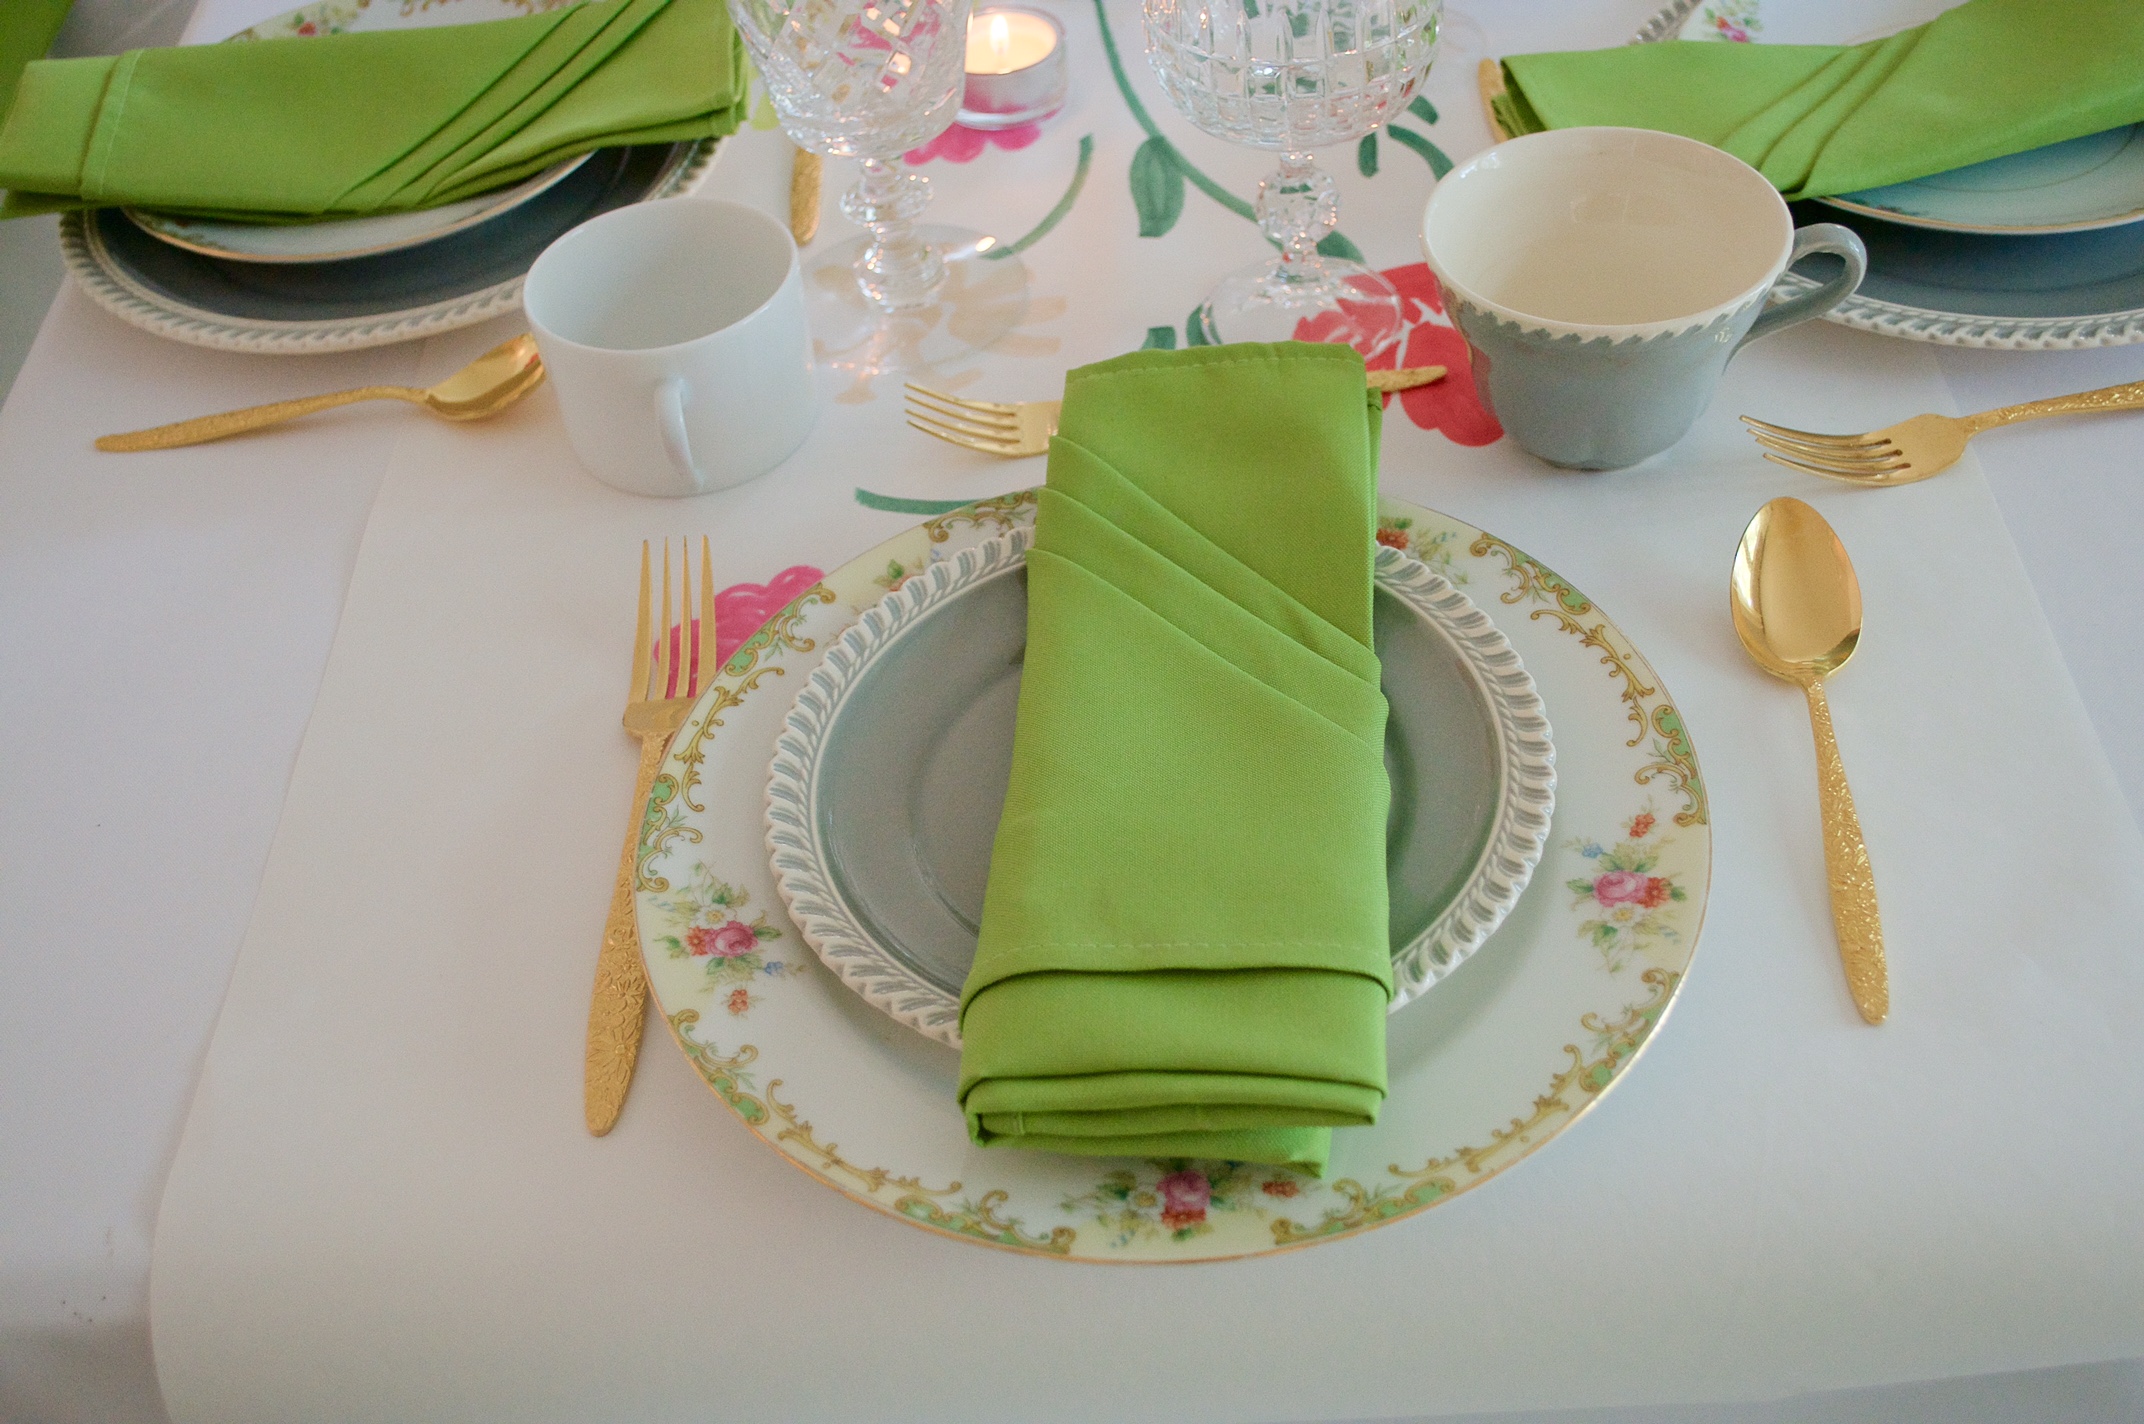 Mix-and-match vintage place settings